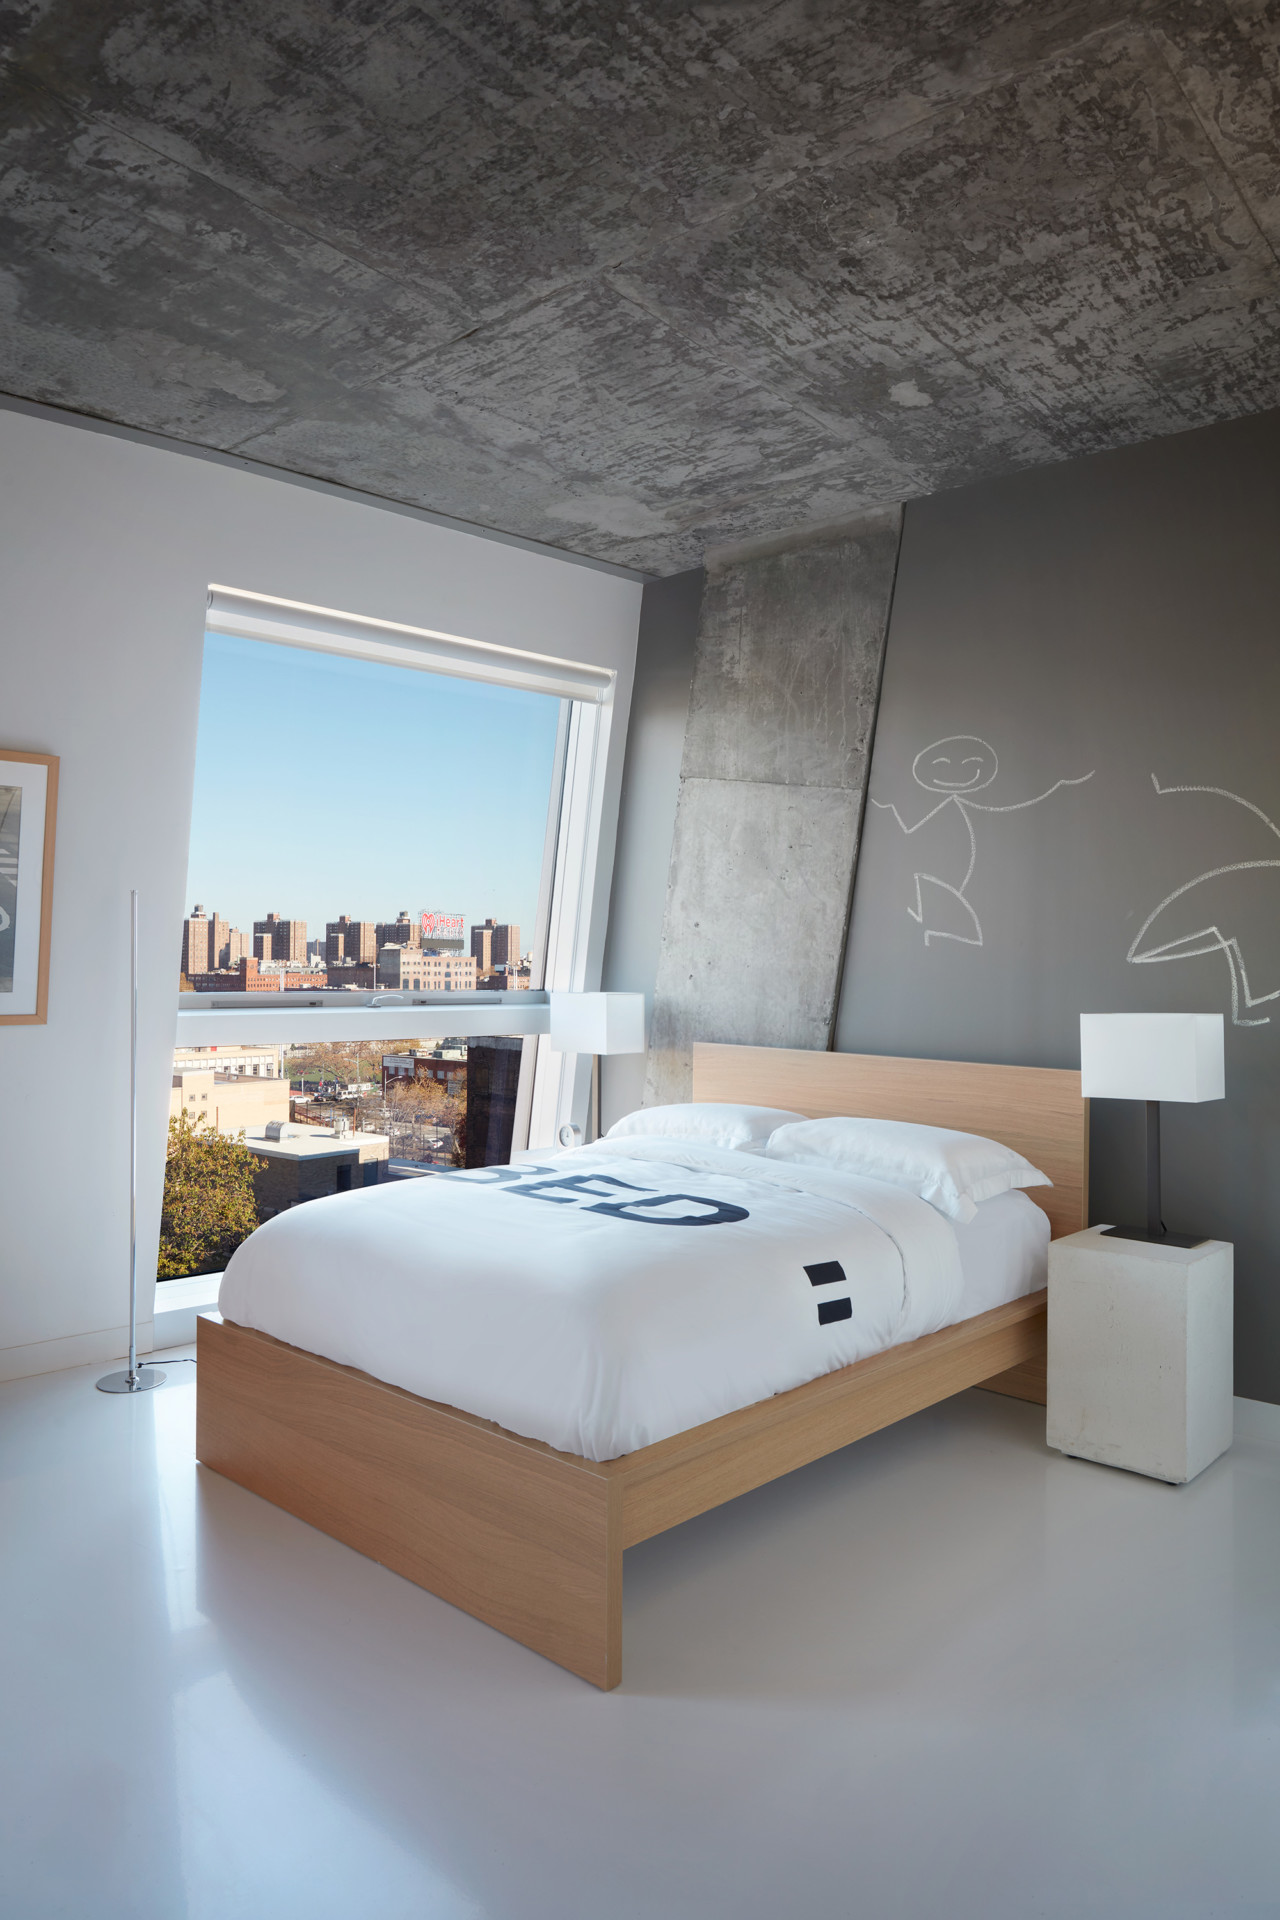 Interior of a bedroom with concrete ceilings